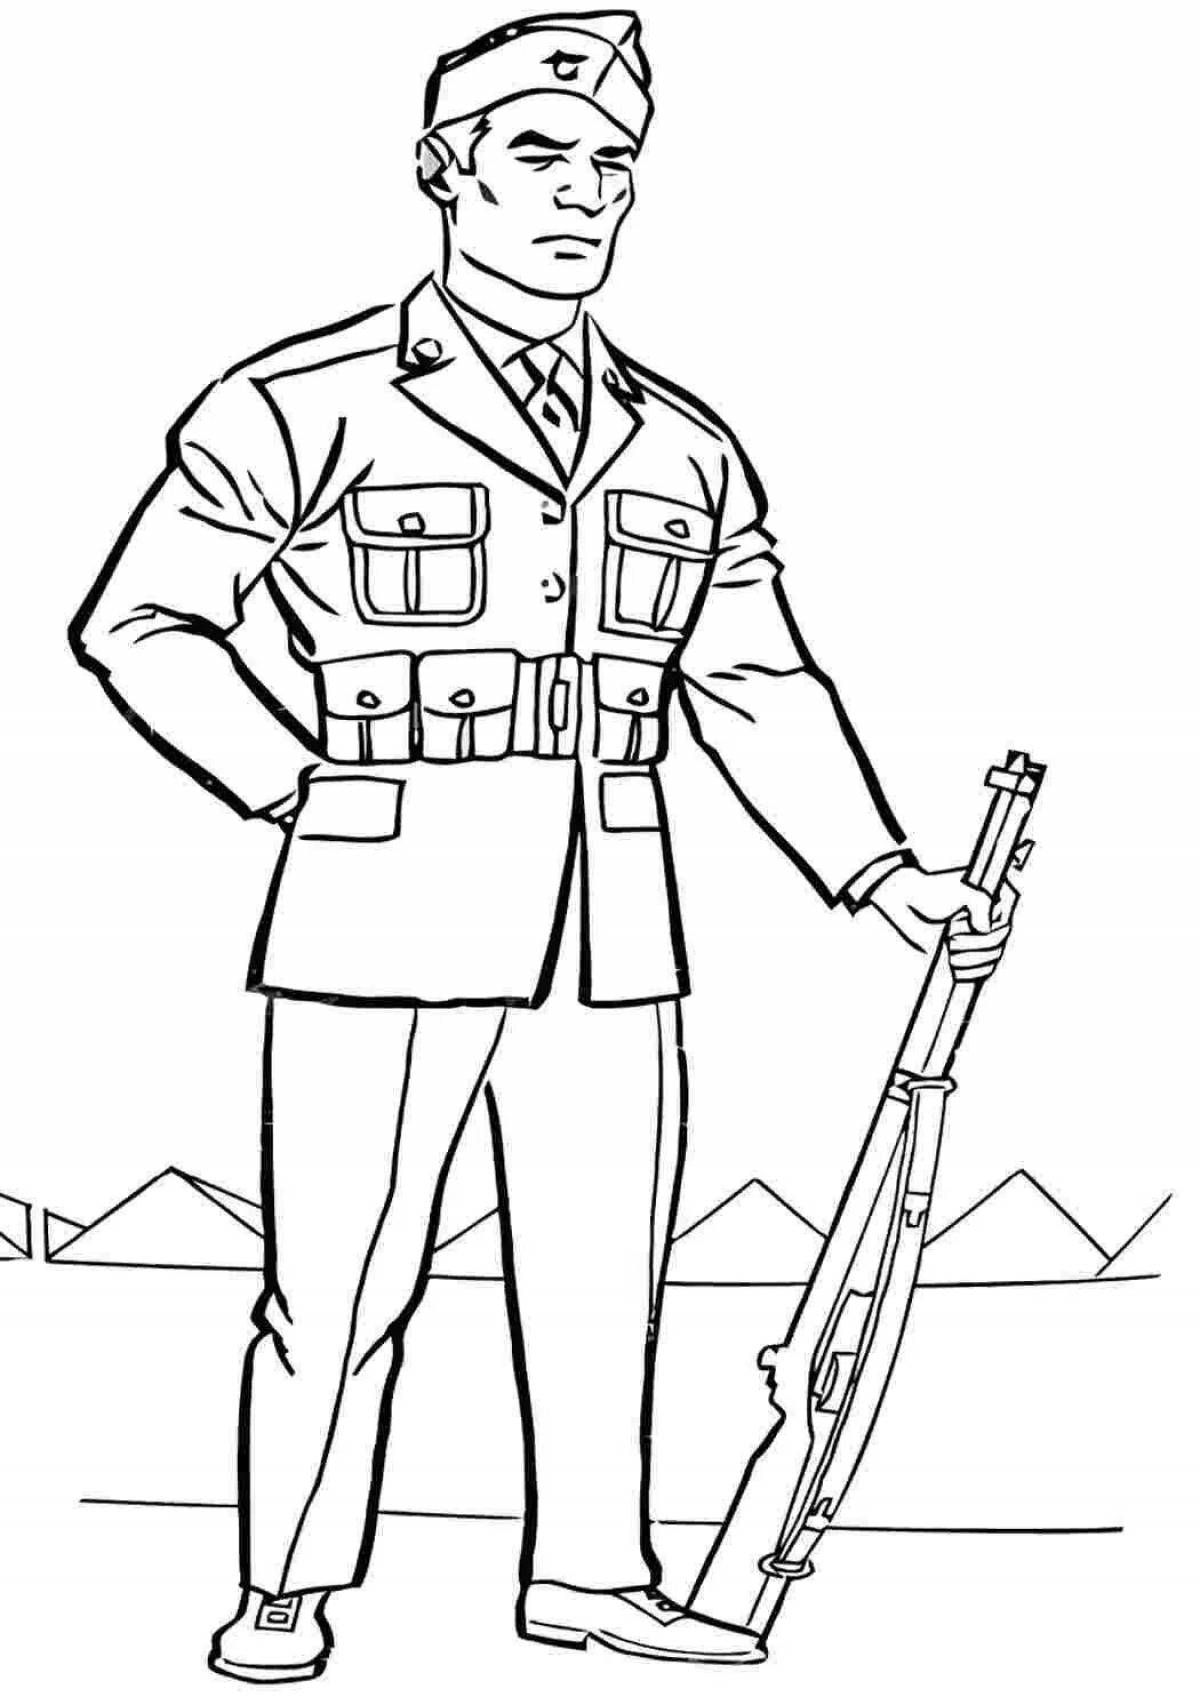 Fun coloring Russian soldier for children